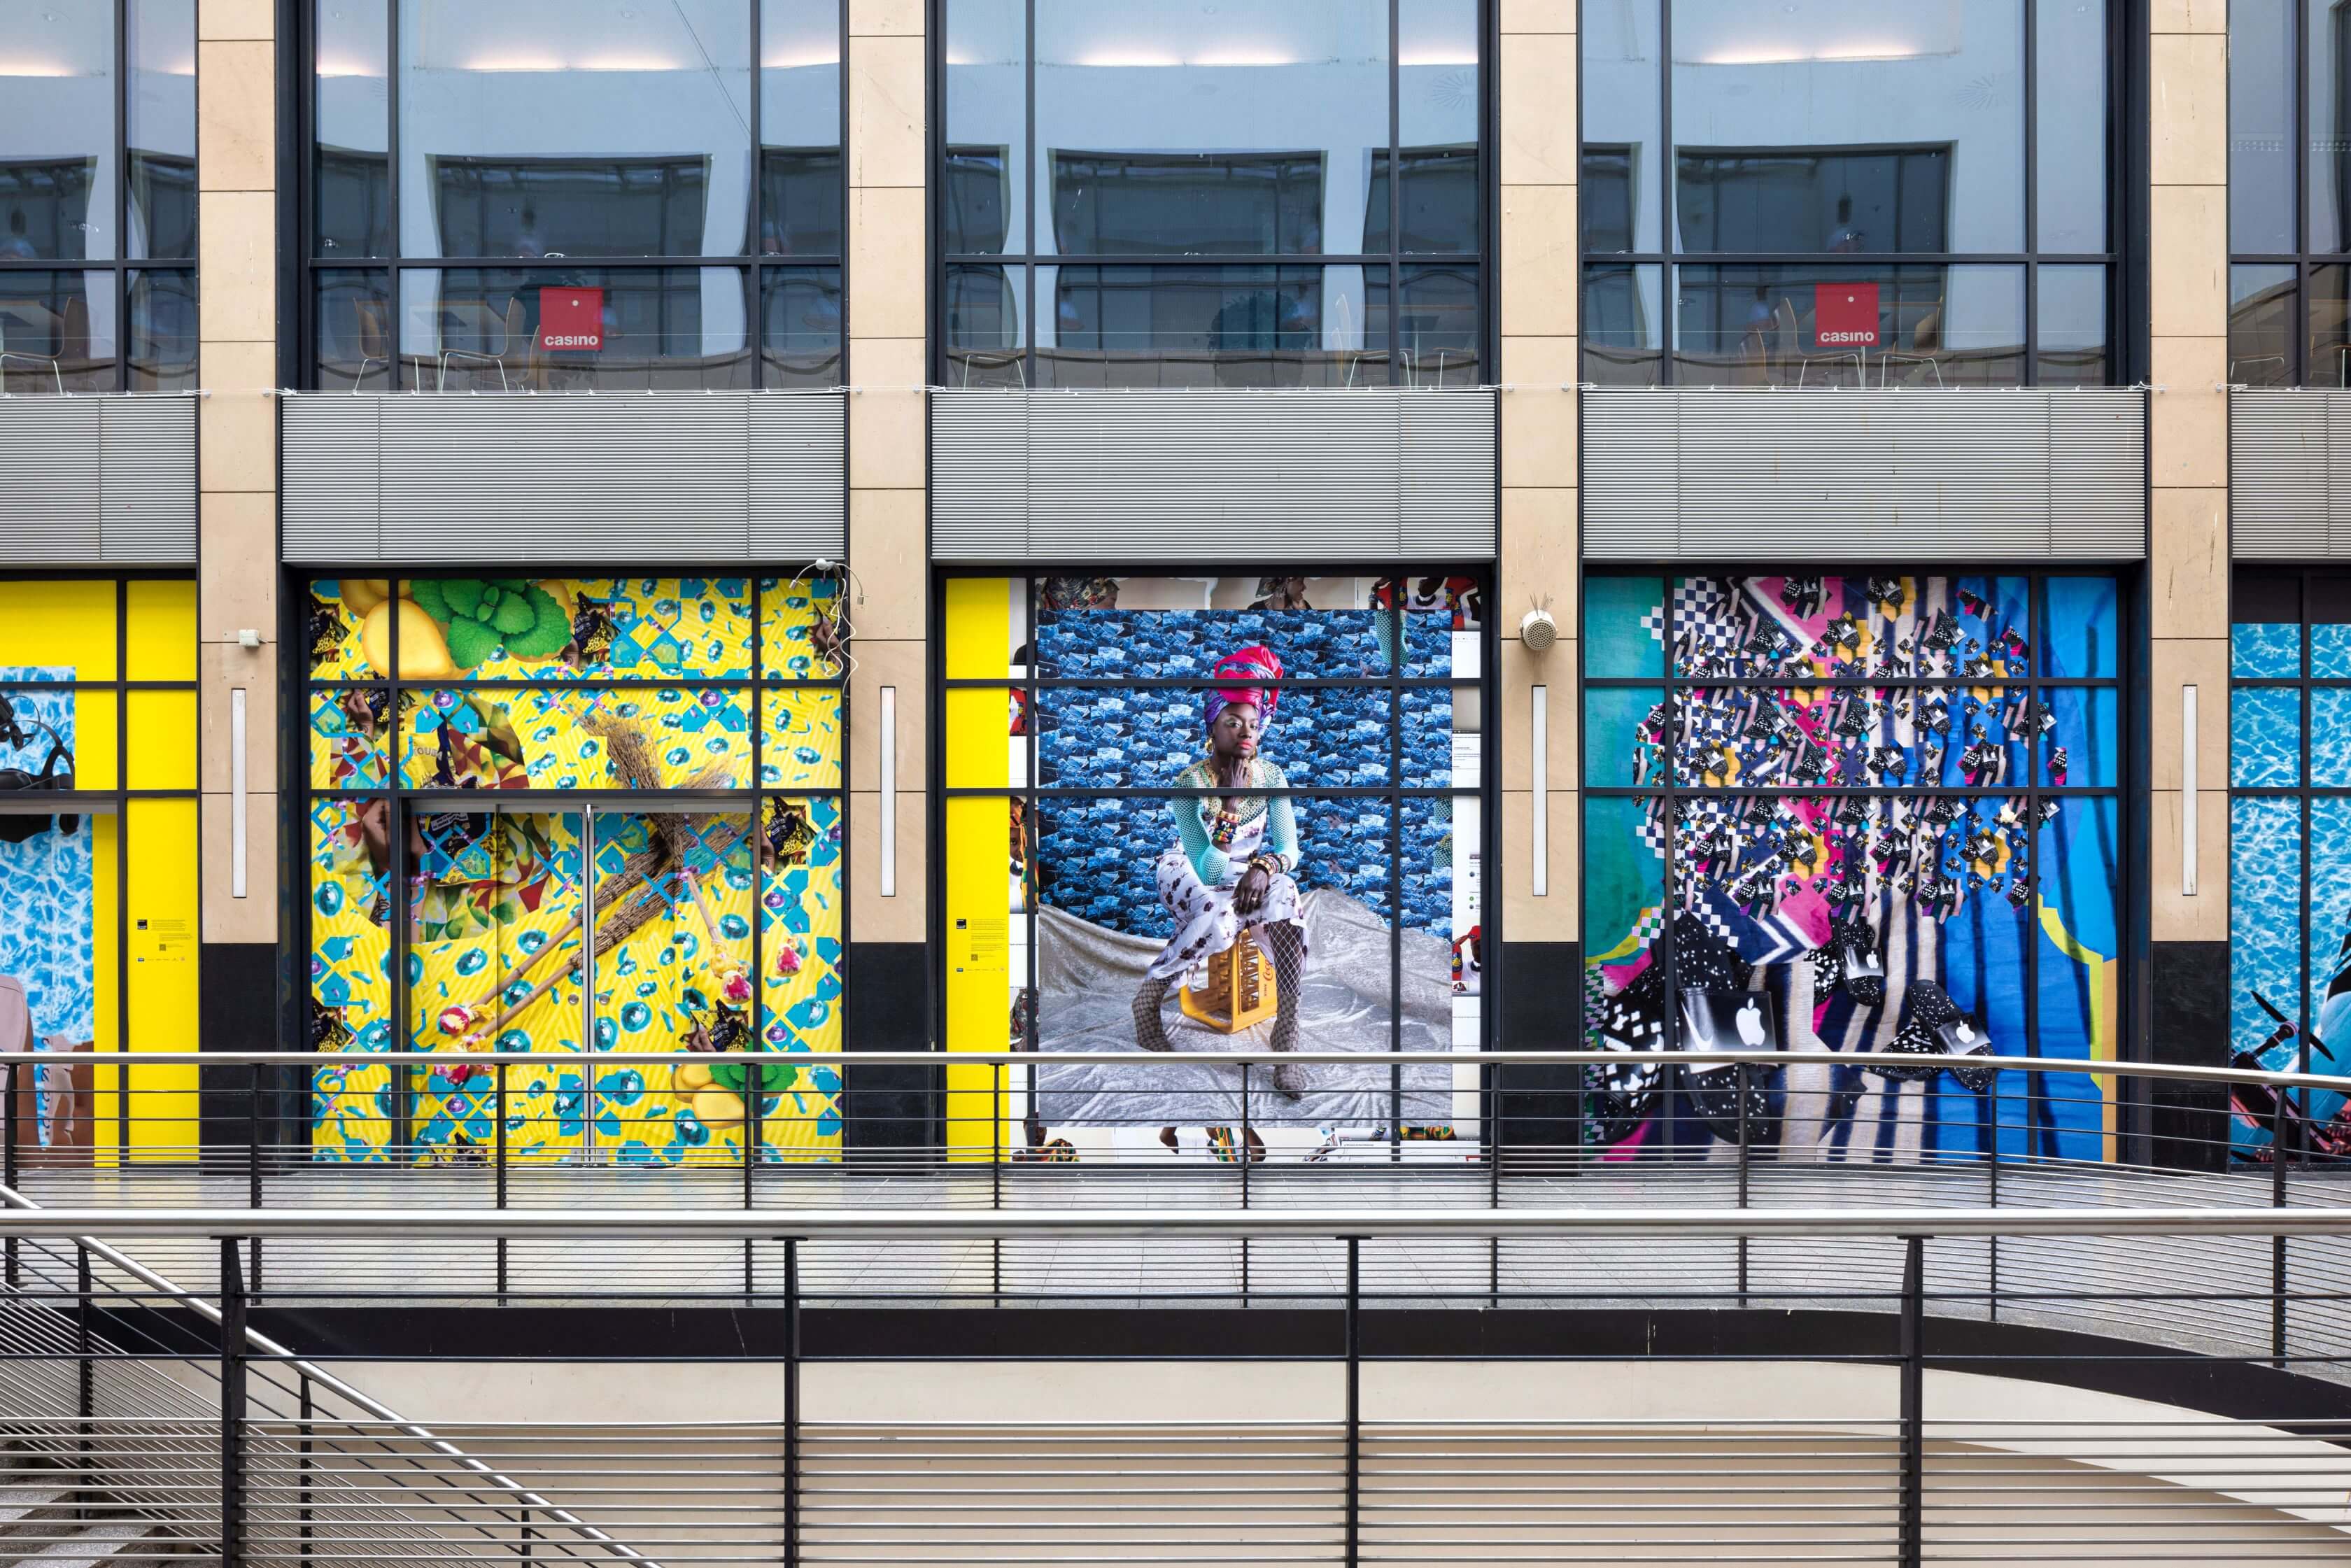 The photograph shows a section of Mannheim's main station with three digital collages from the series Tools for Conviviality. The collage in the center shows the portrait of Awa sitting on a yellow Coca-Cola crate. To her left and right are more colorful collages with various repeating patterns